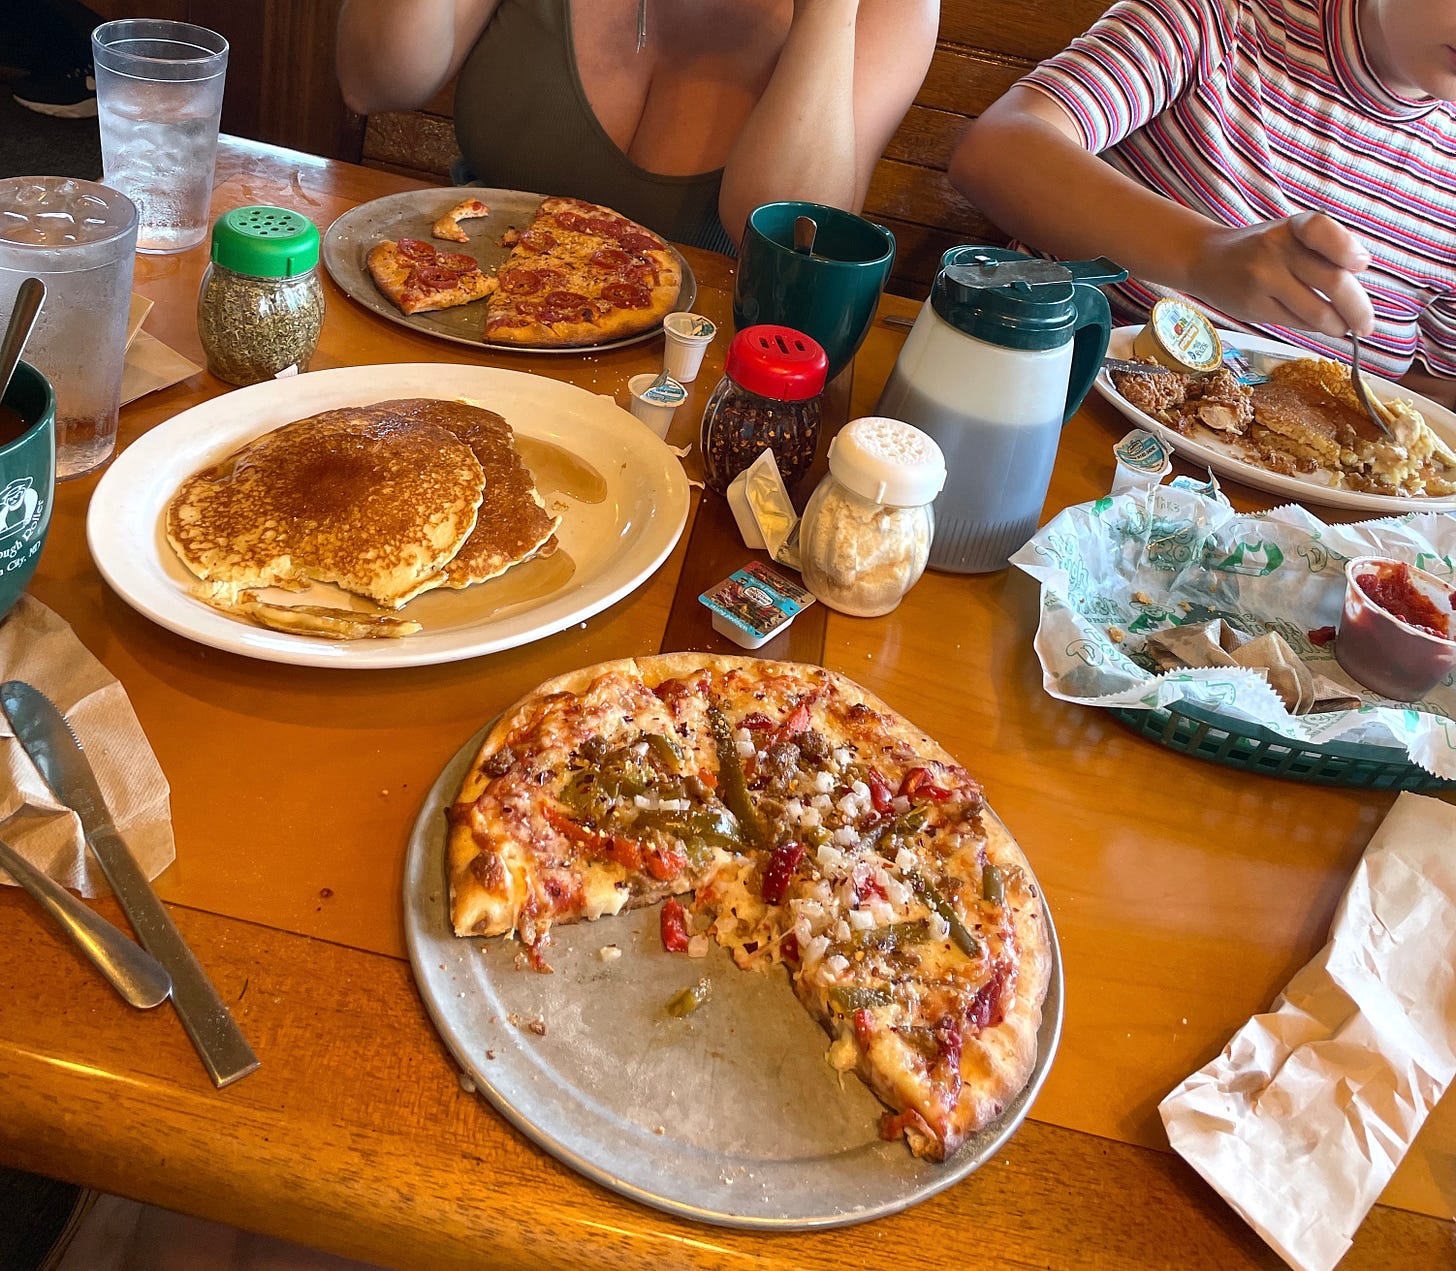 pancakes and pizza from the Dough Roller in Ocean City Maryland